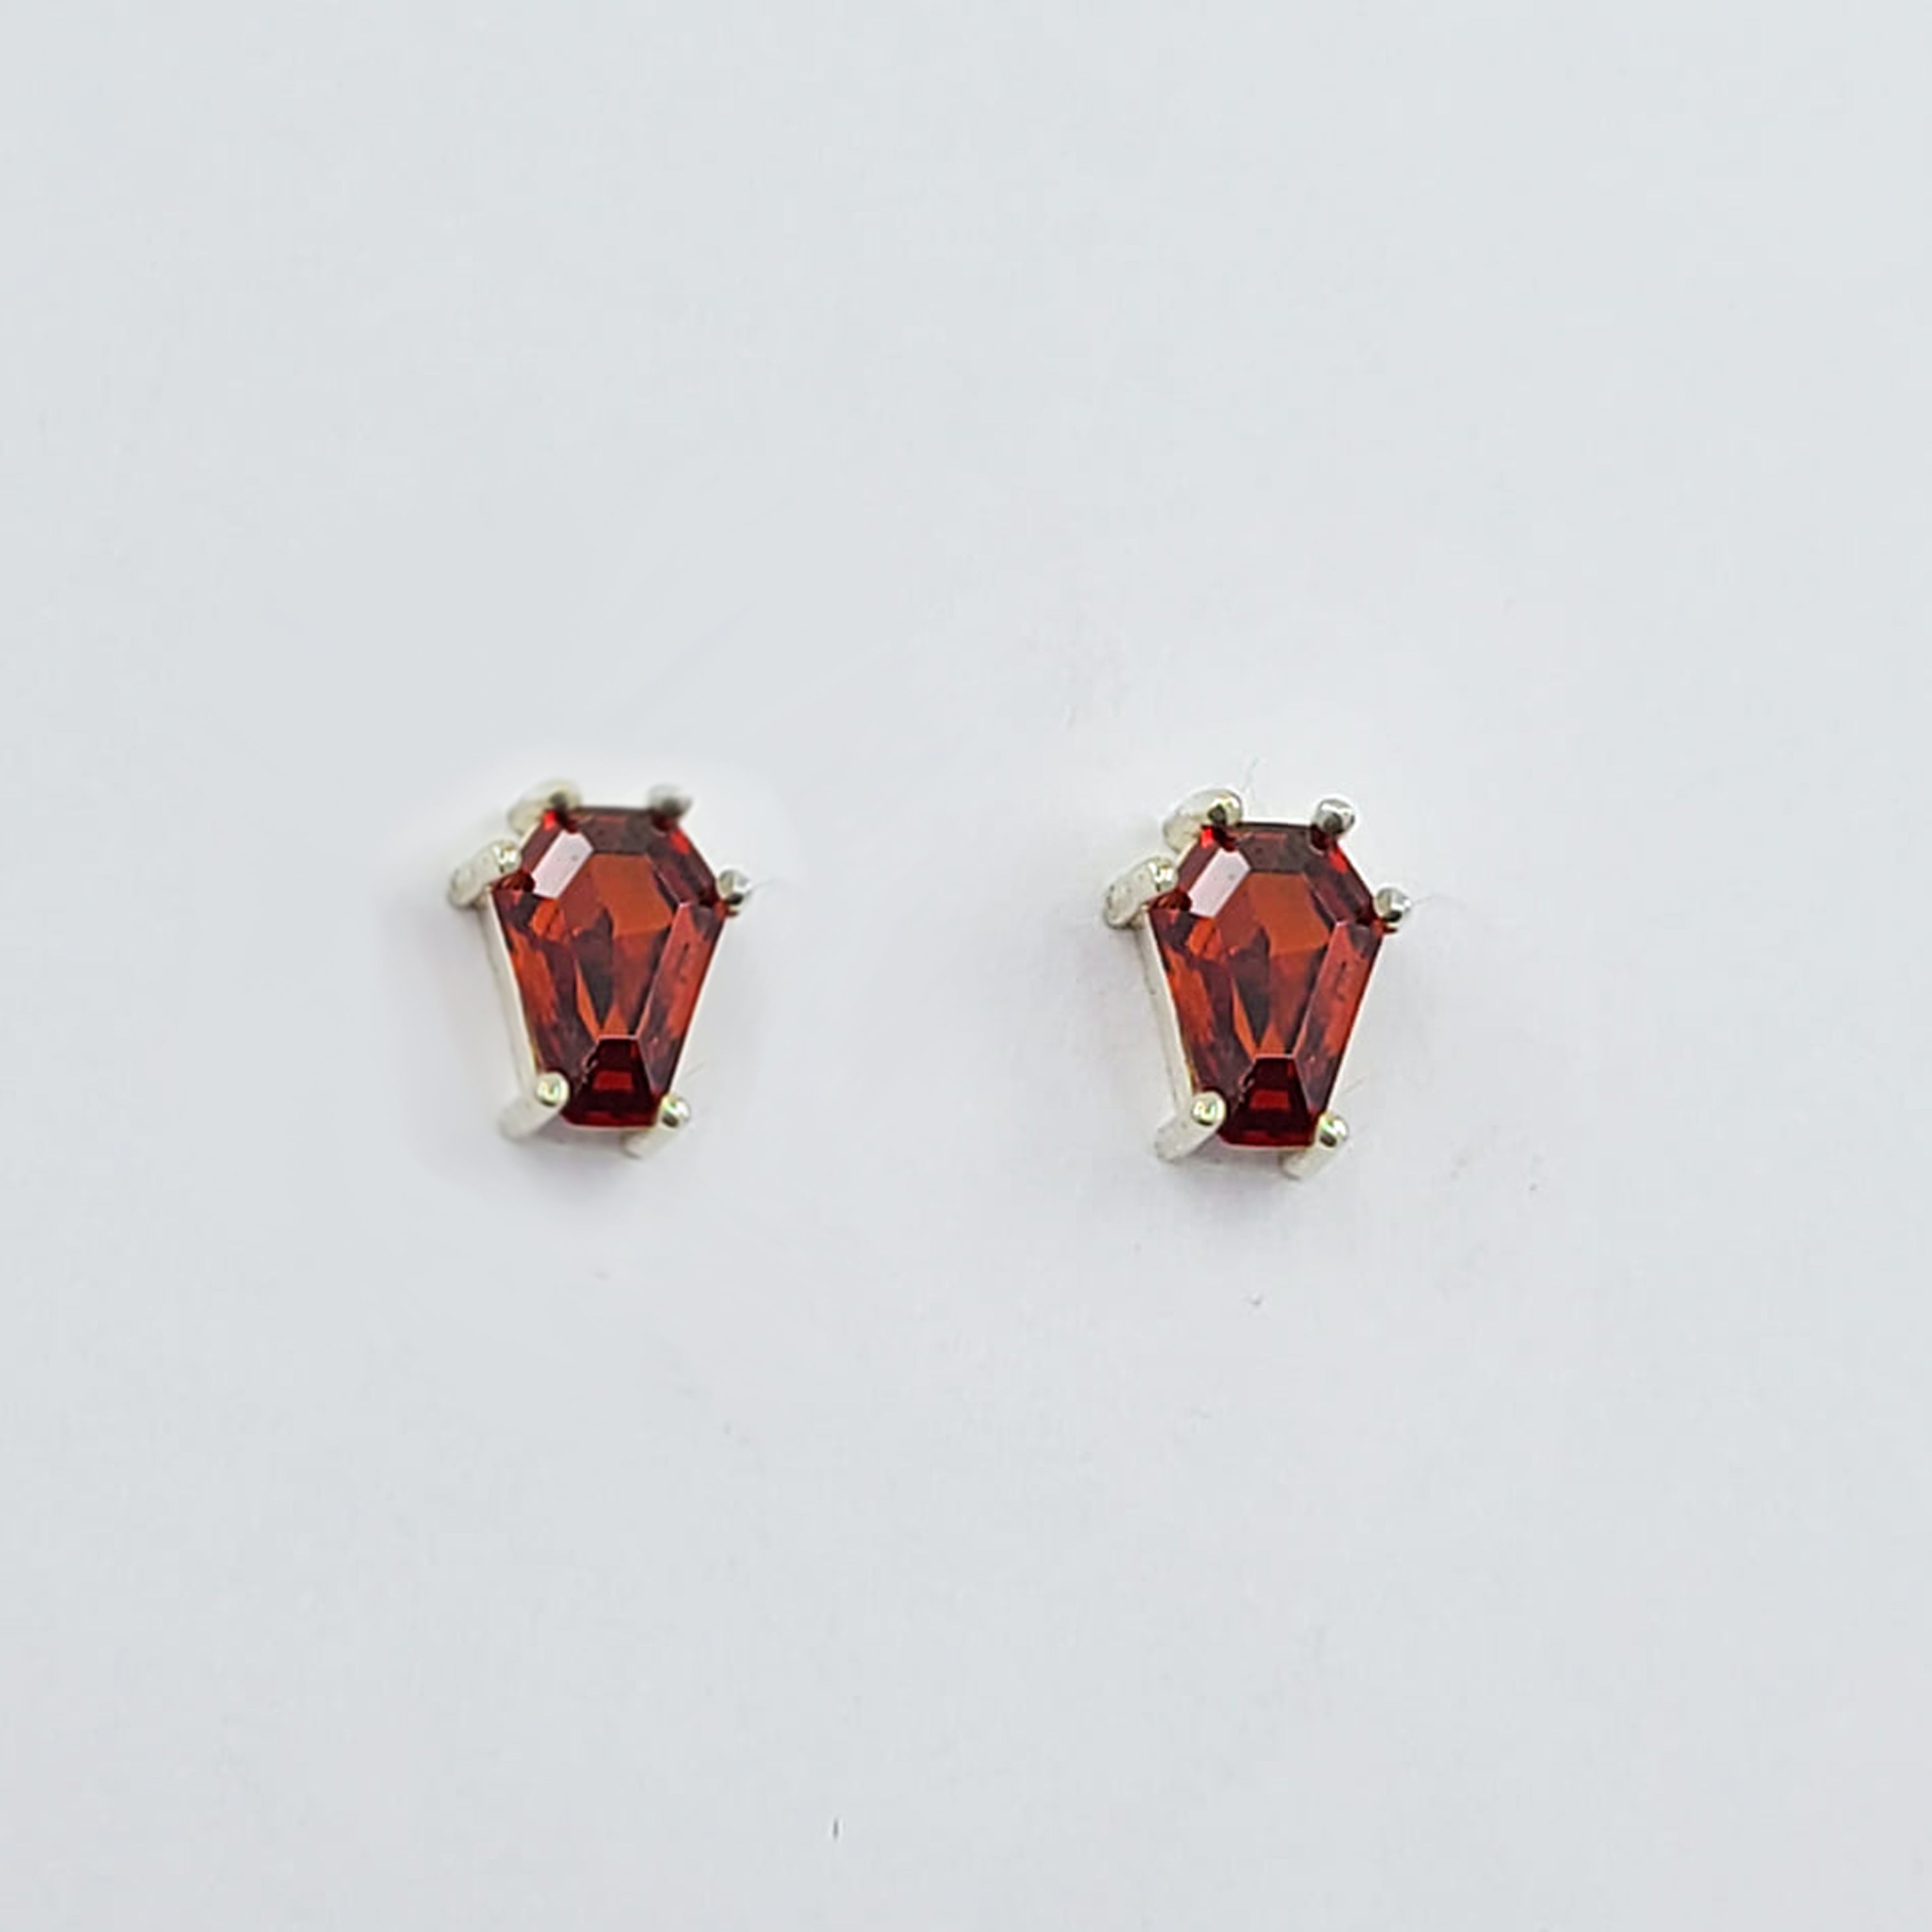 Small Blood Red Coffin Stud Earrings (5x7)